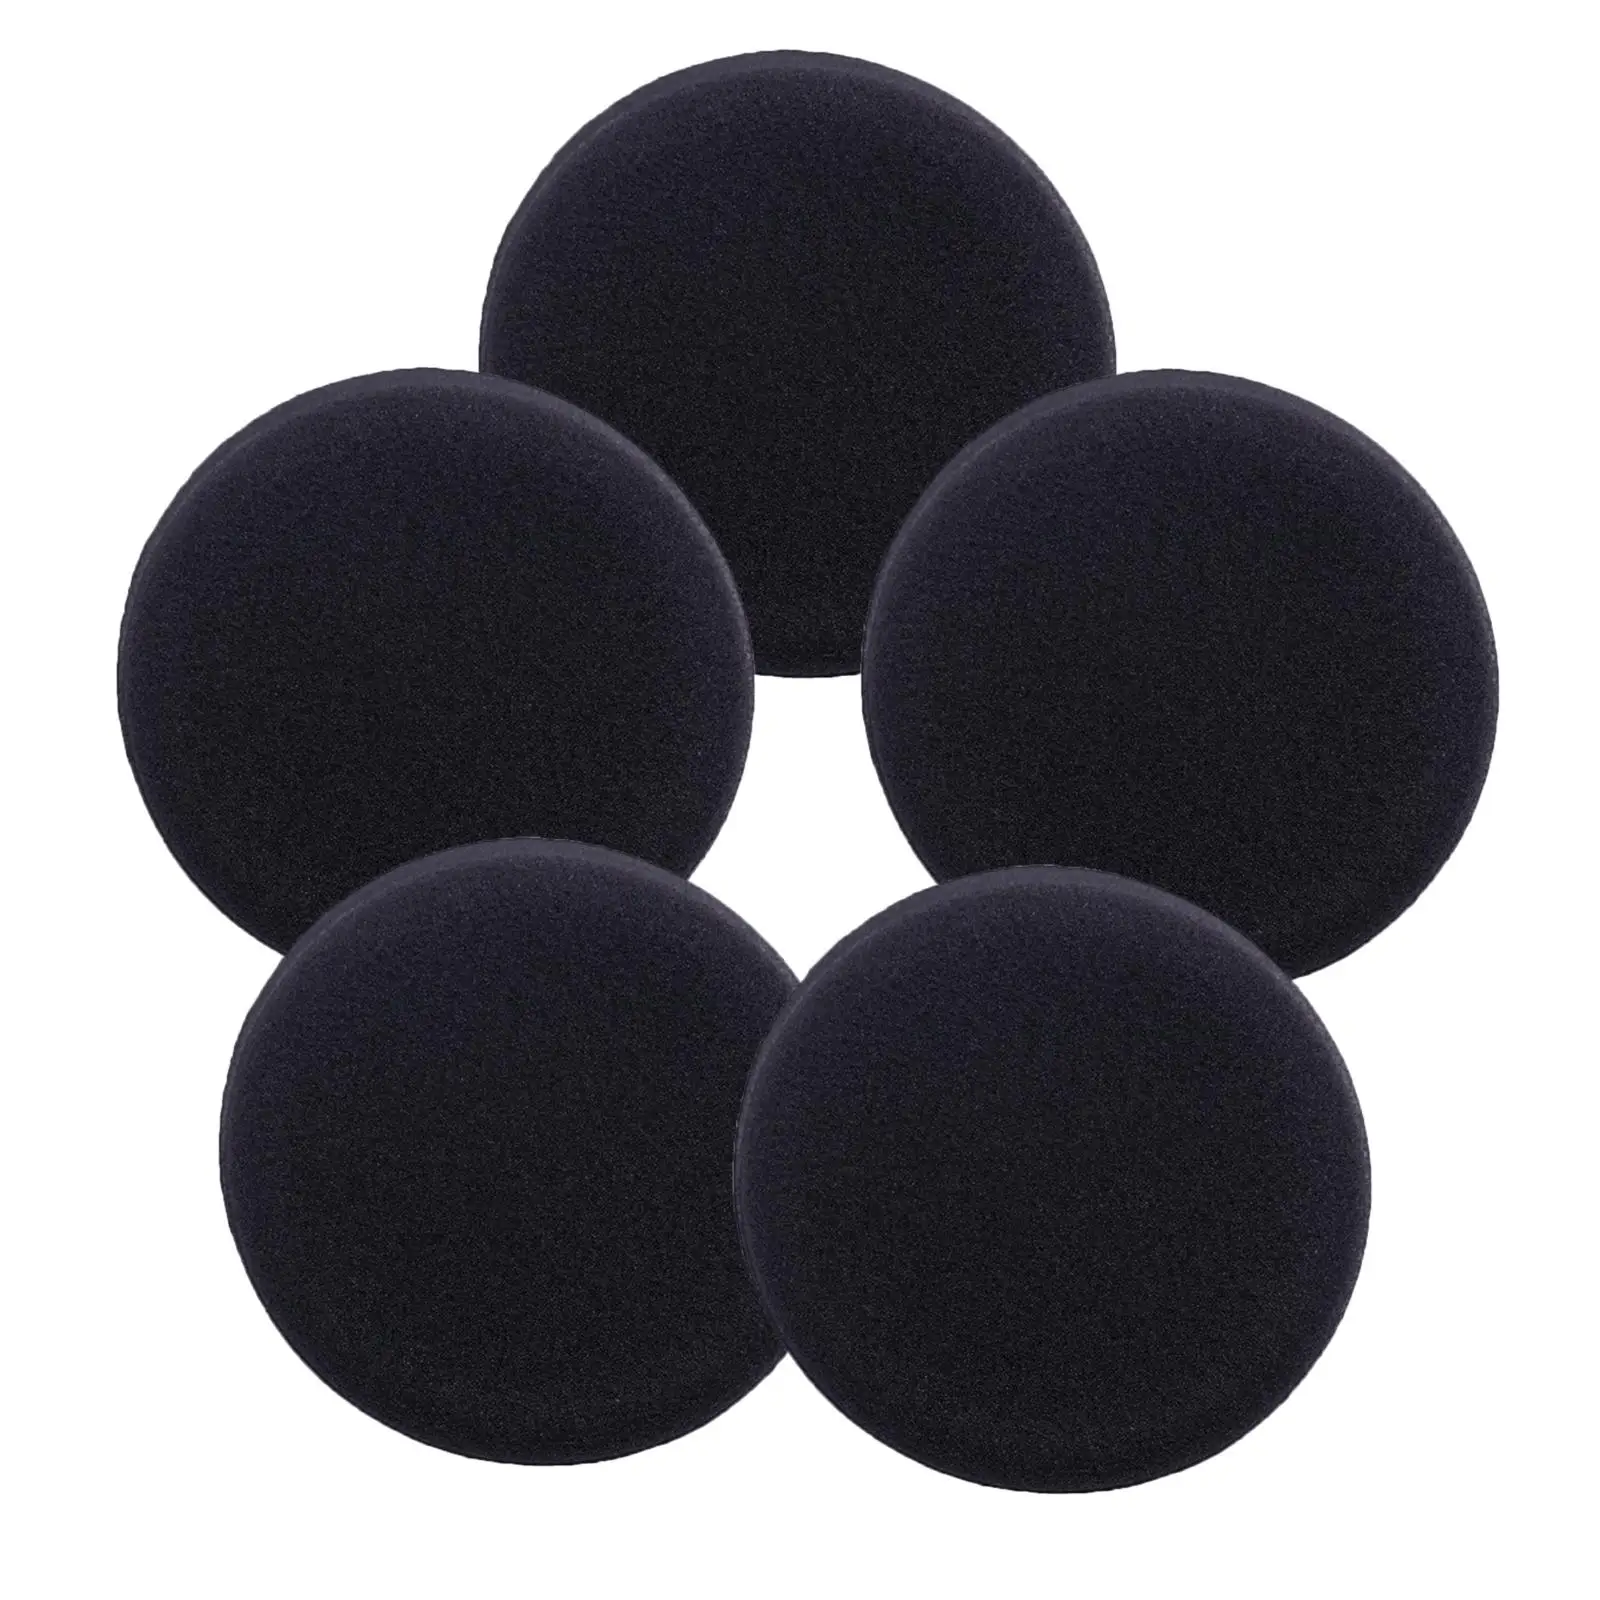 5Pcs Waxing Pads for Vehicle Buffing Sponge Pads Cleaning Tool Round Black